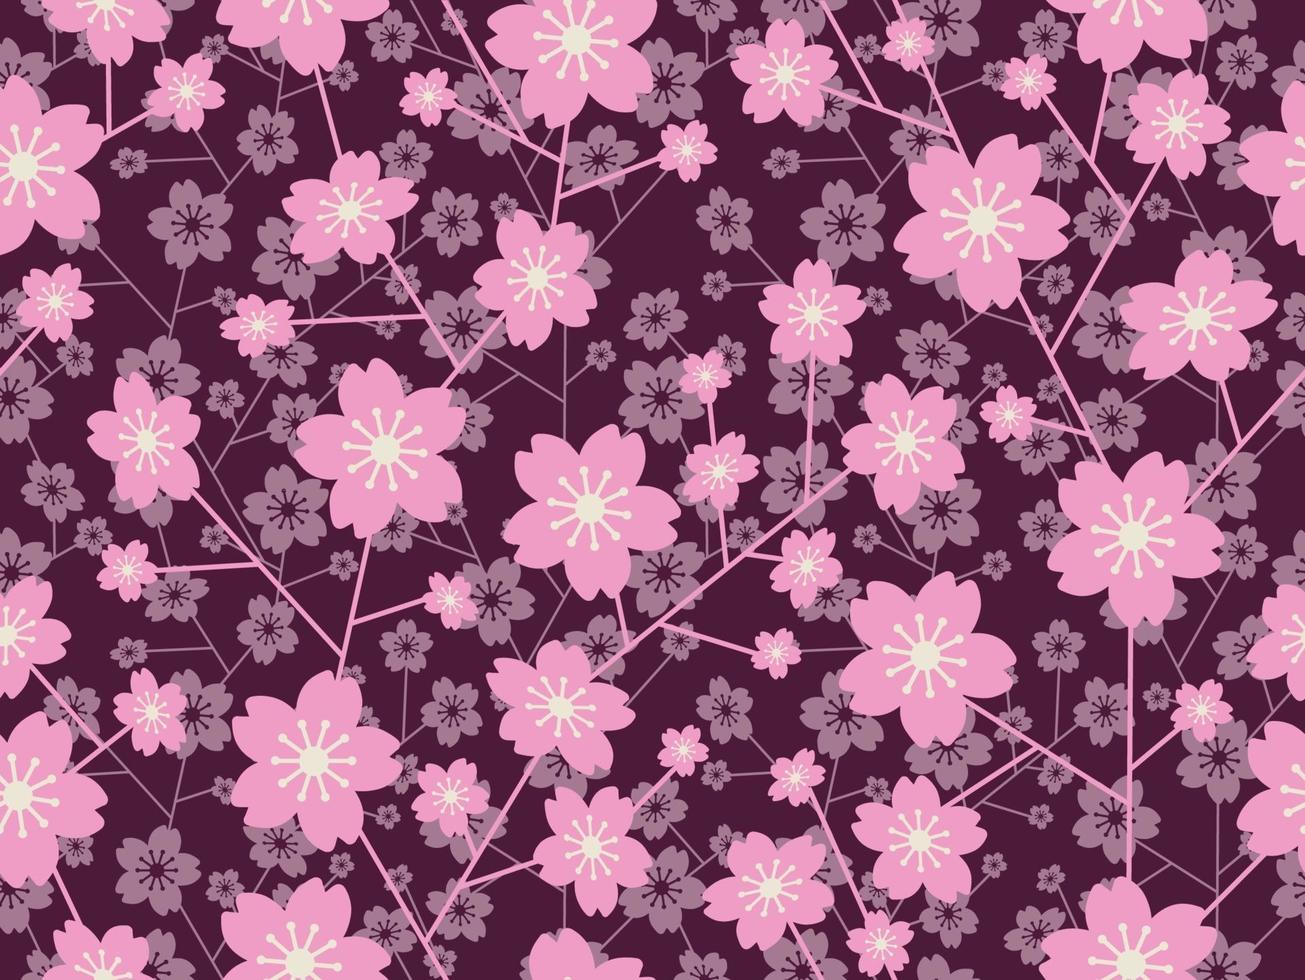 Seamless Cherry Blossom Floral Pattern Isolated On A Black Background, Vector Illustration.